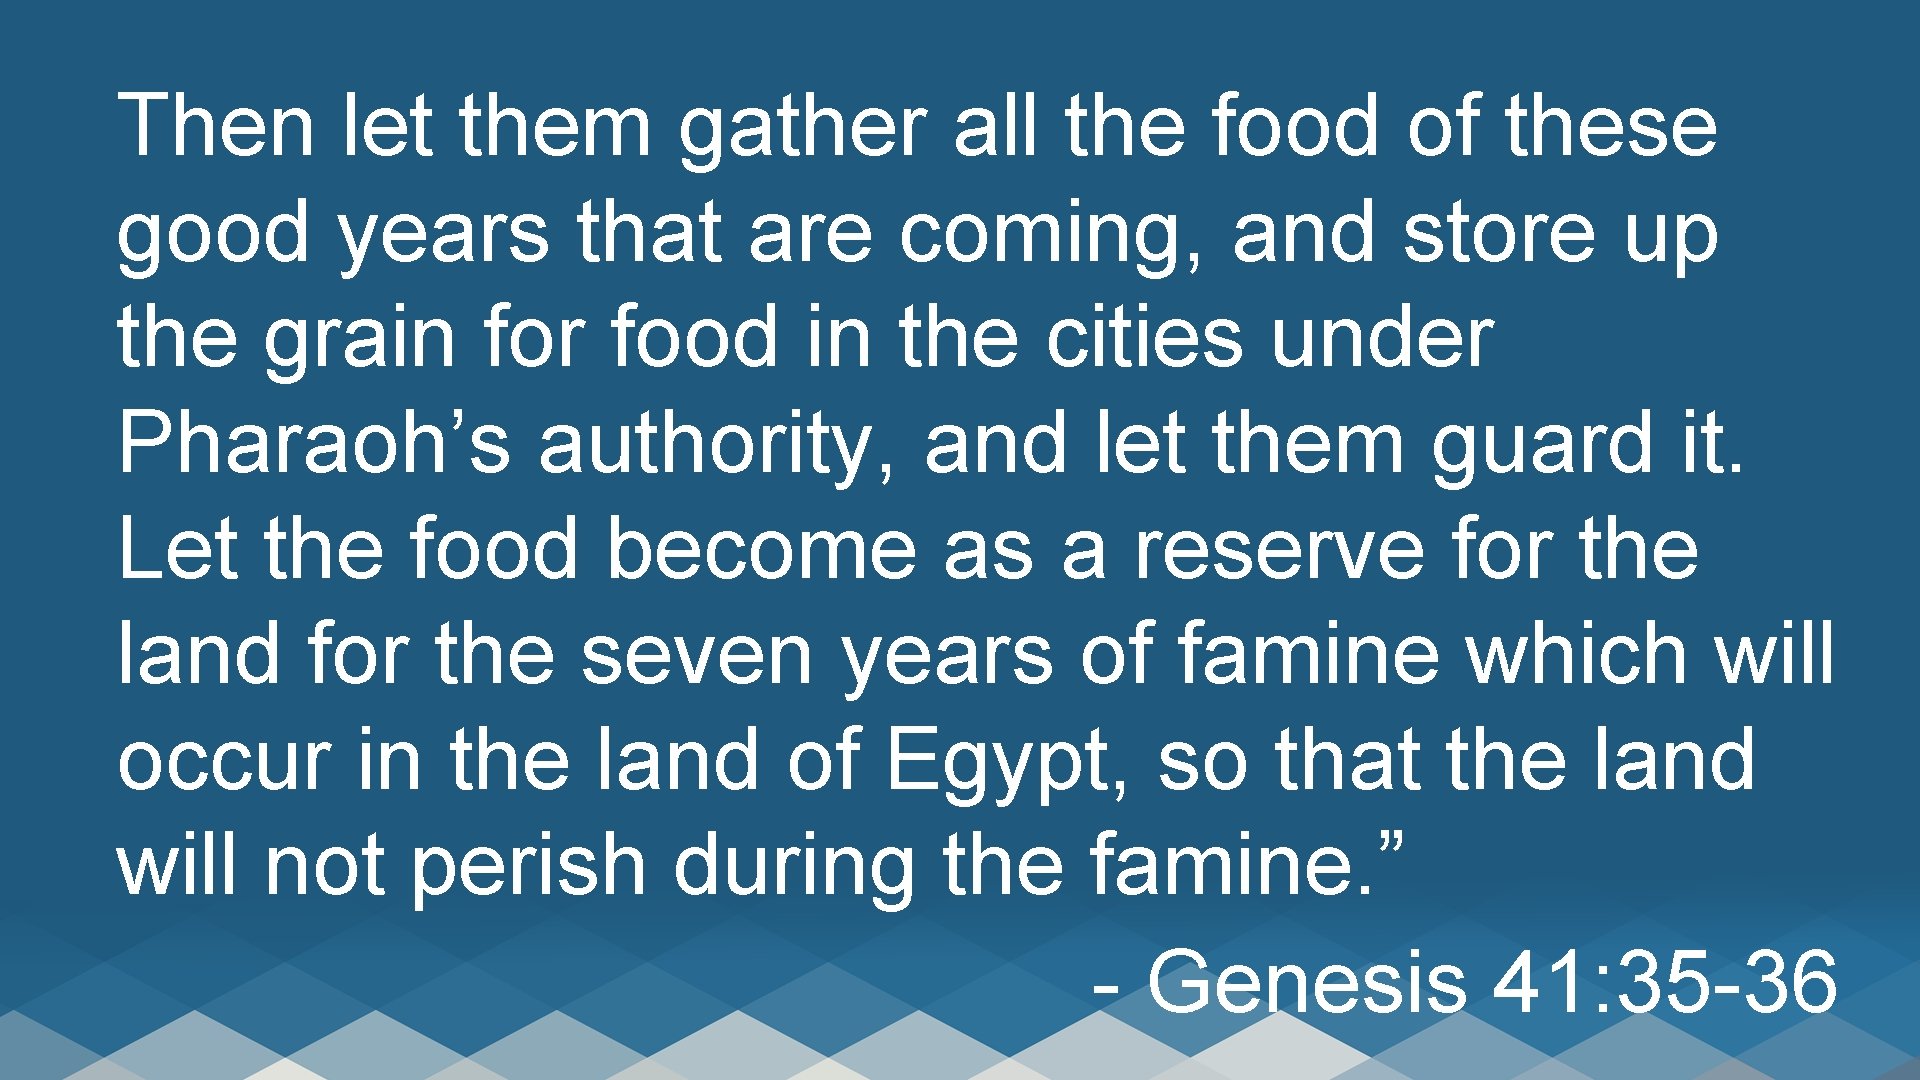 Then let them gather all the food of these good years that are coming,